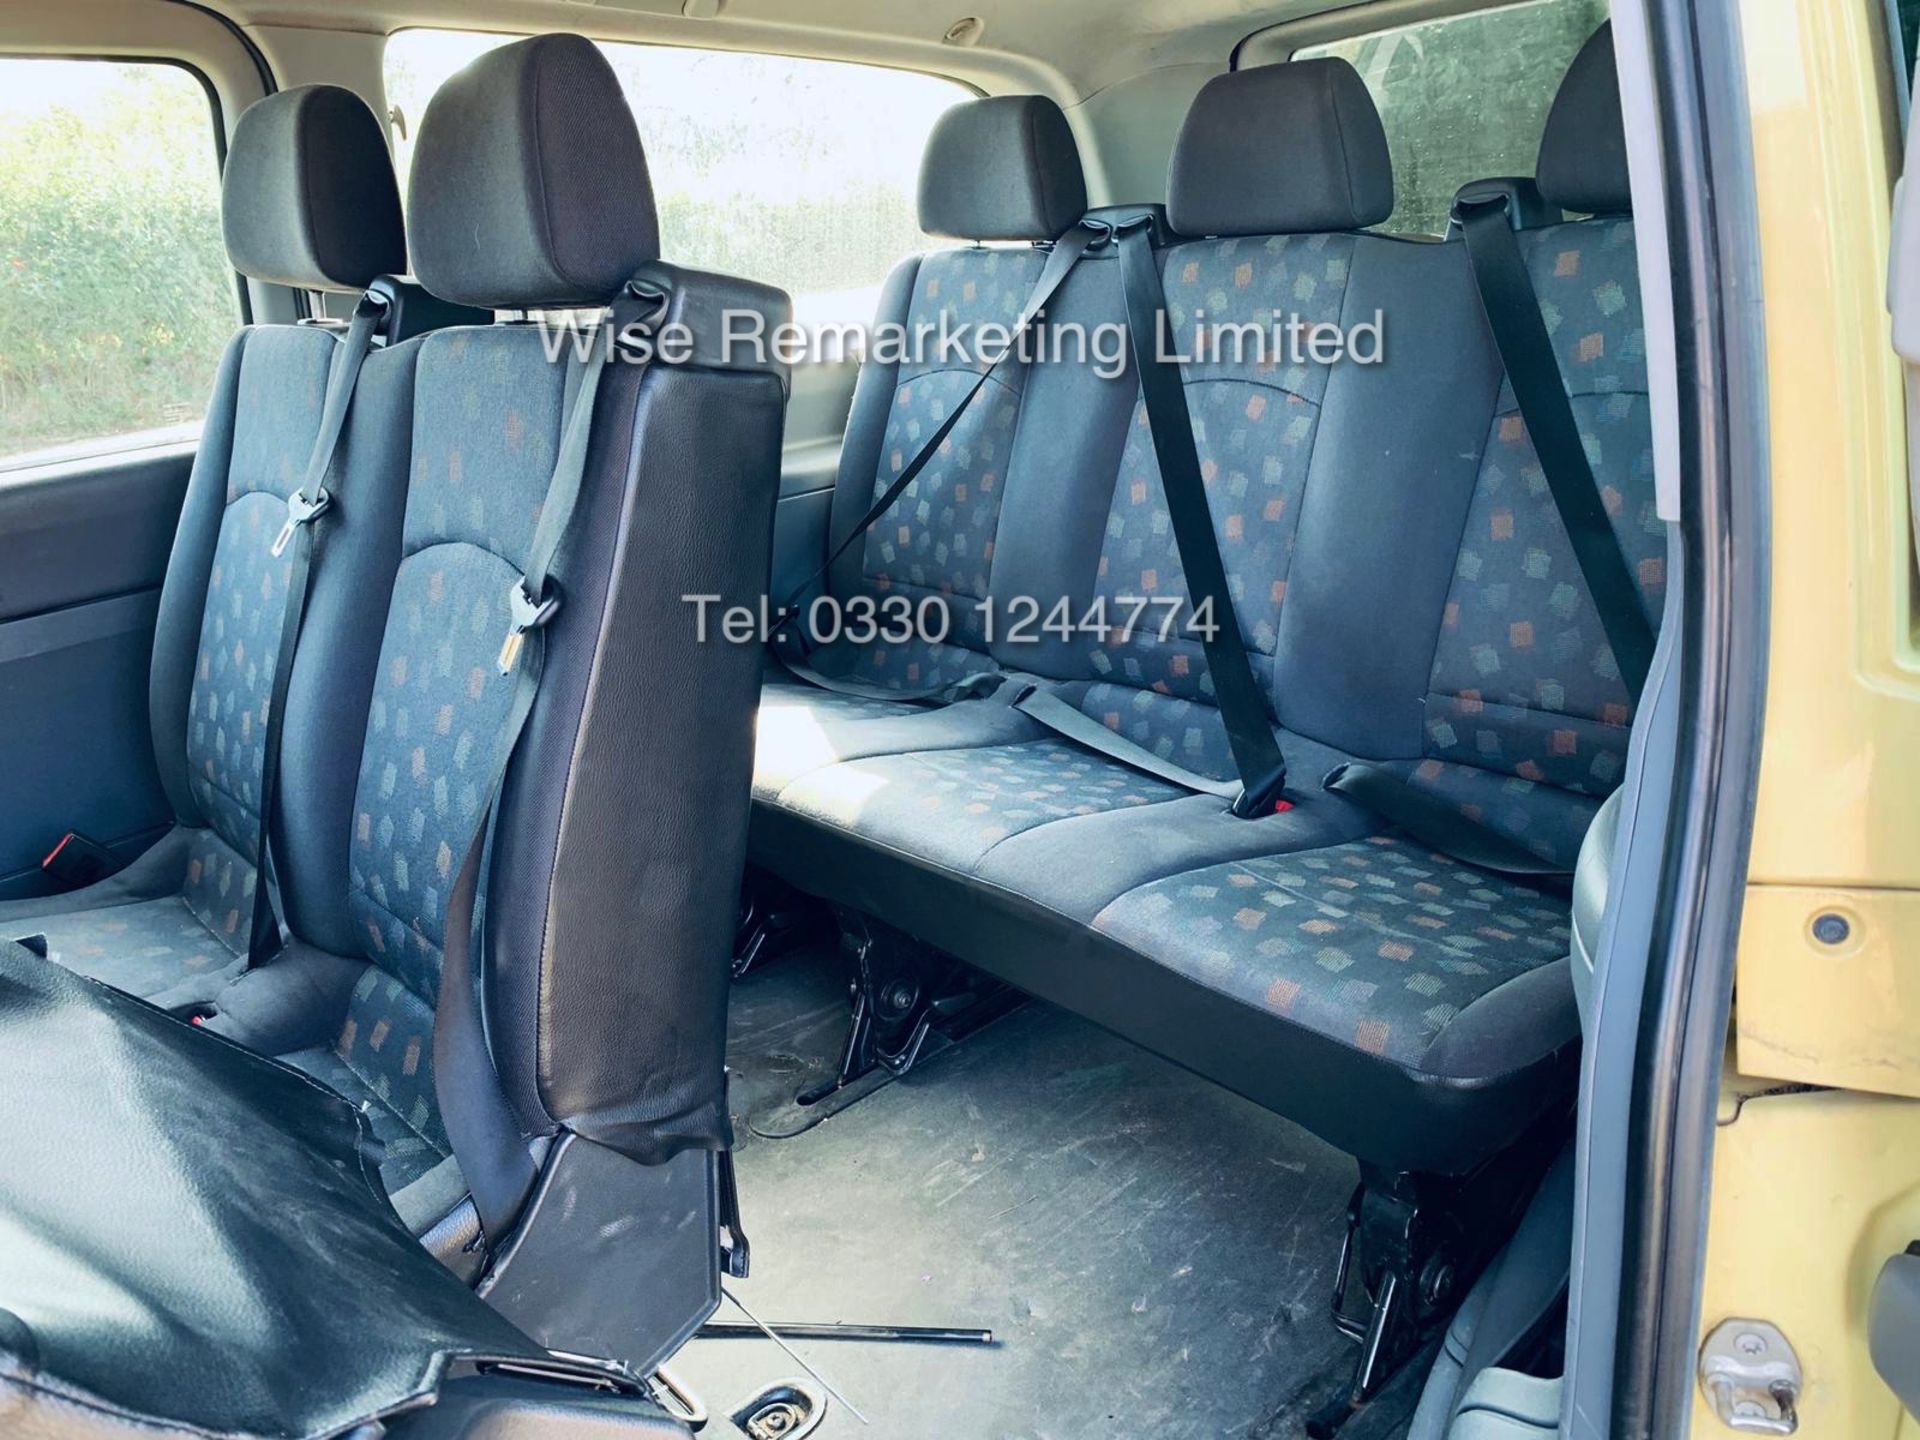 MERCEDES VITO 111 2.1 CDI TRAVELINER **9 SEATER** (2008 08 REG) 1 KEEPER FROM NEW - Image 11 of 19